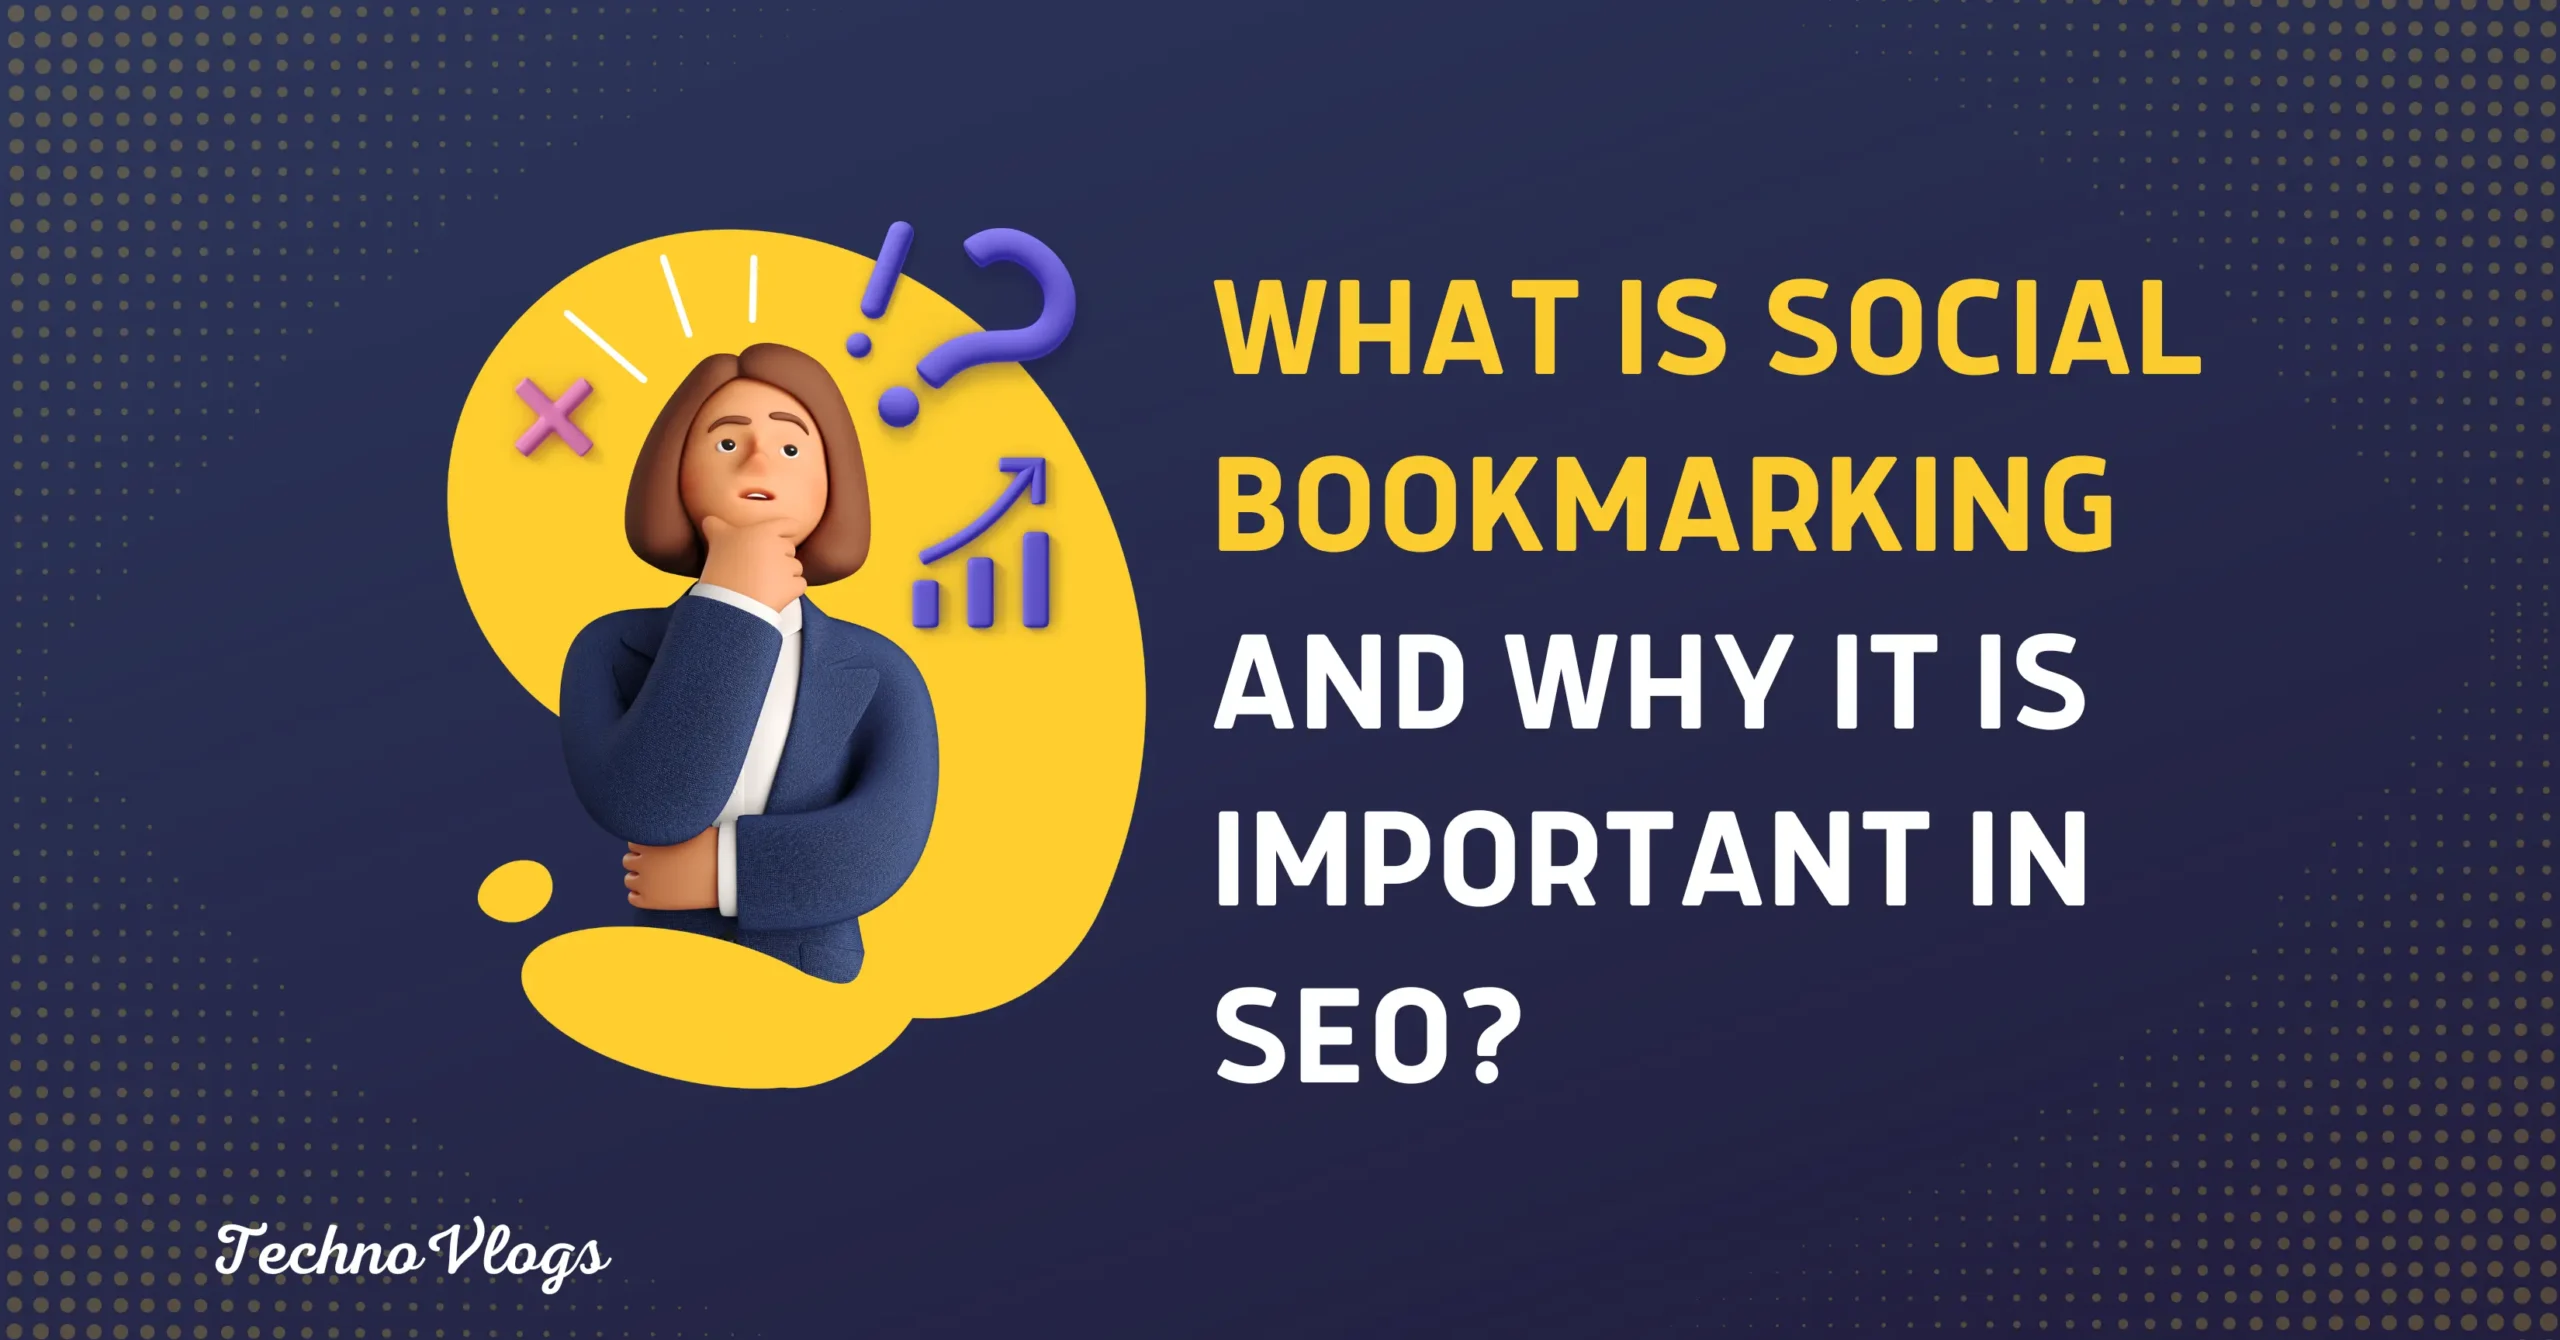 What is social bookmarking and why it is important in SEO?